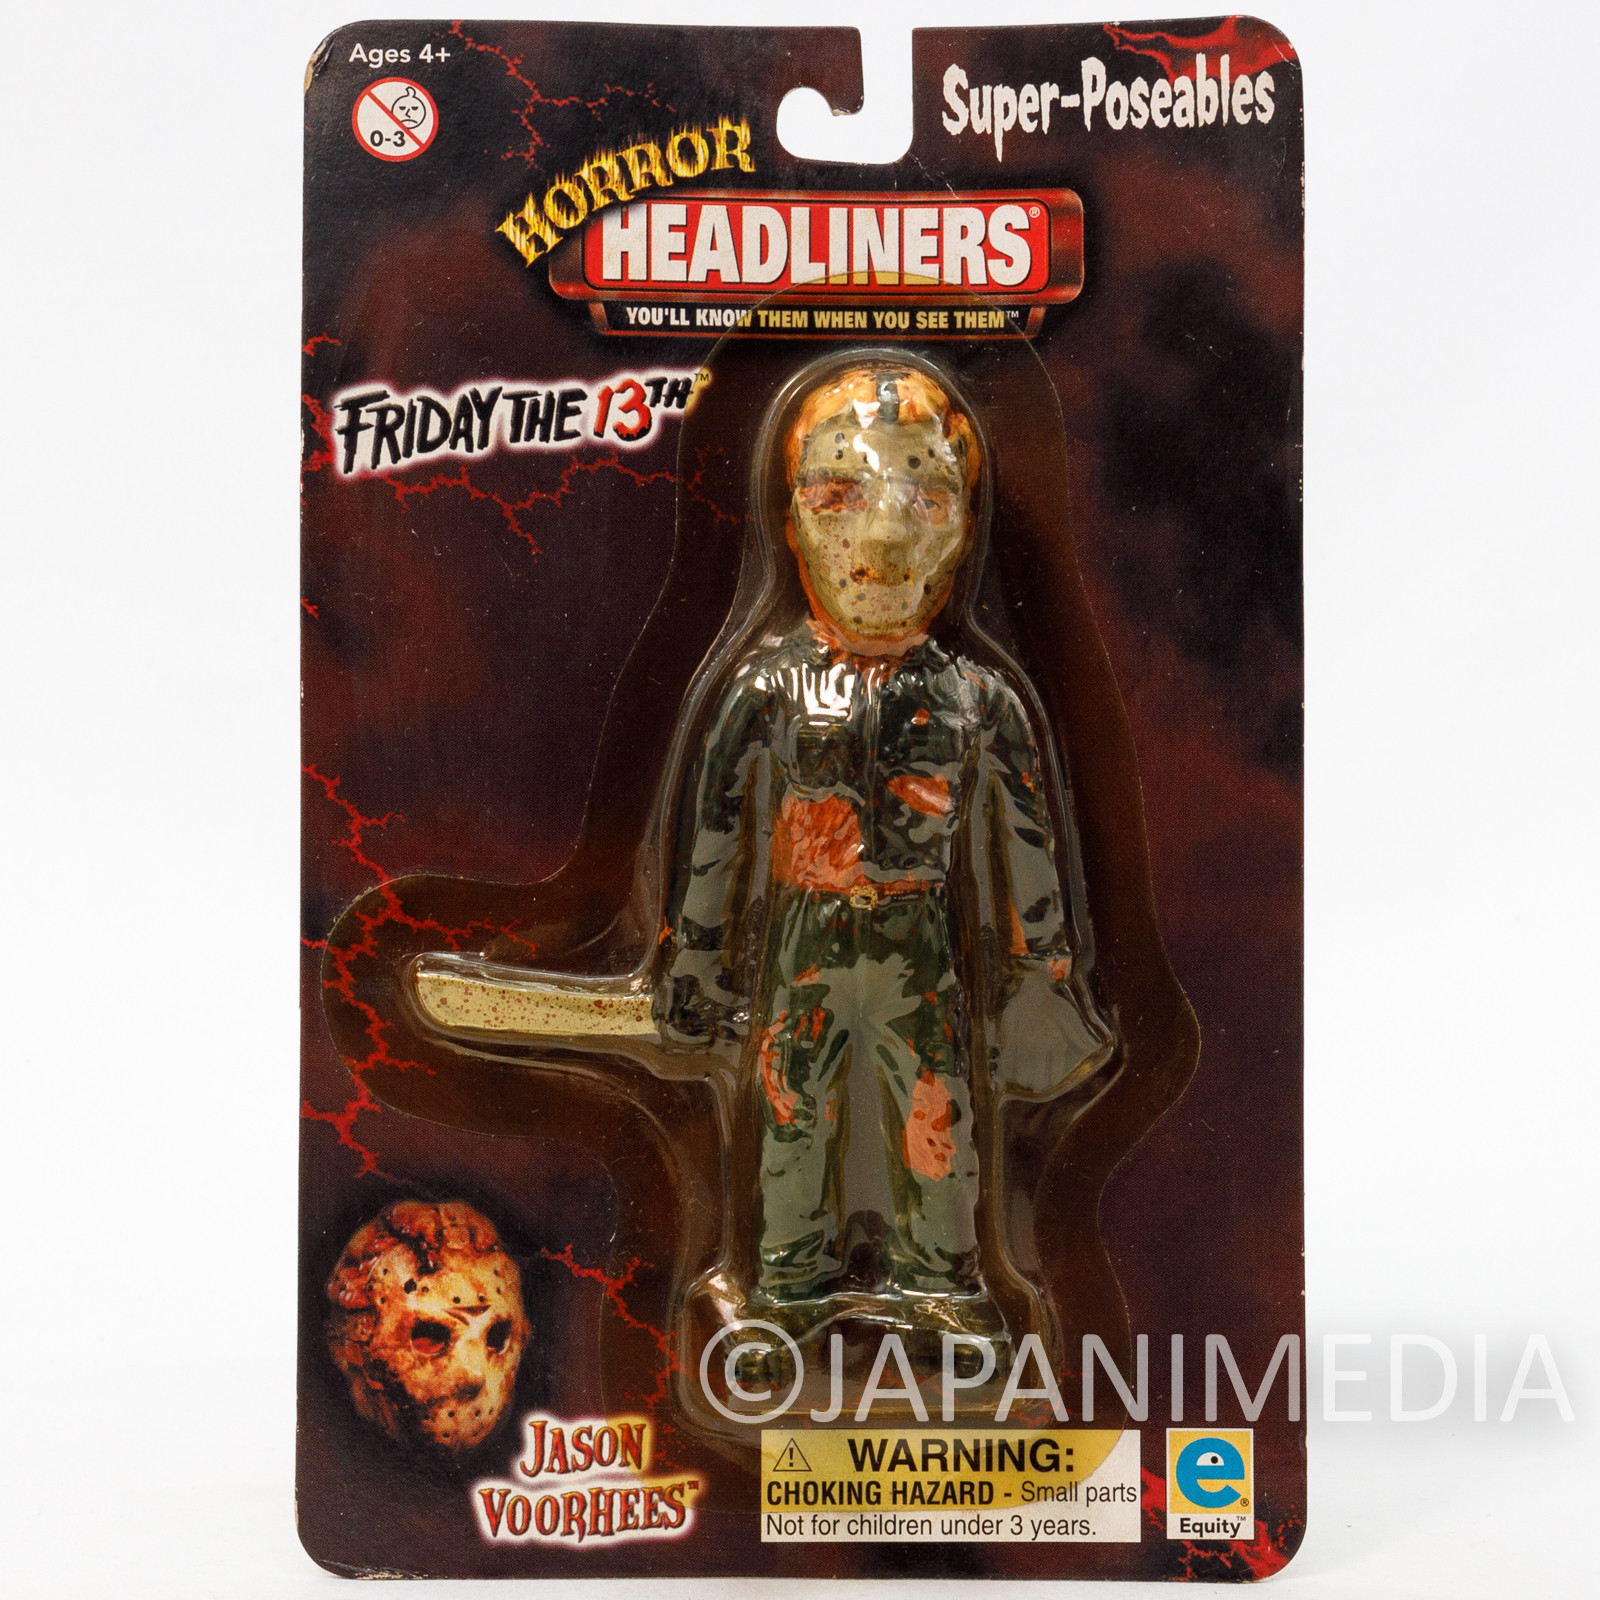 Friday The 13th JASON VOORHEES Super Poseable Figure Horror Headliners